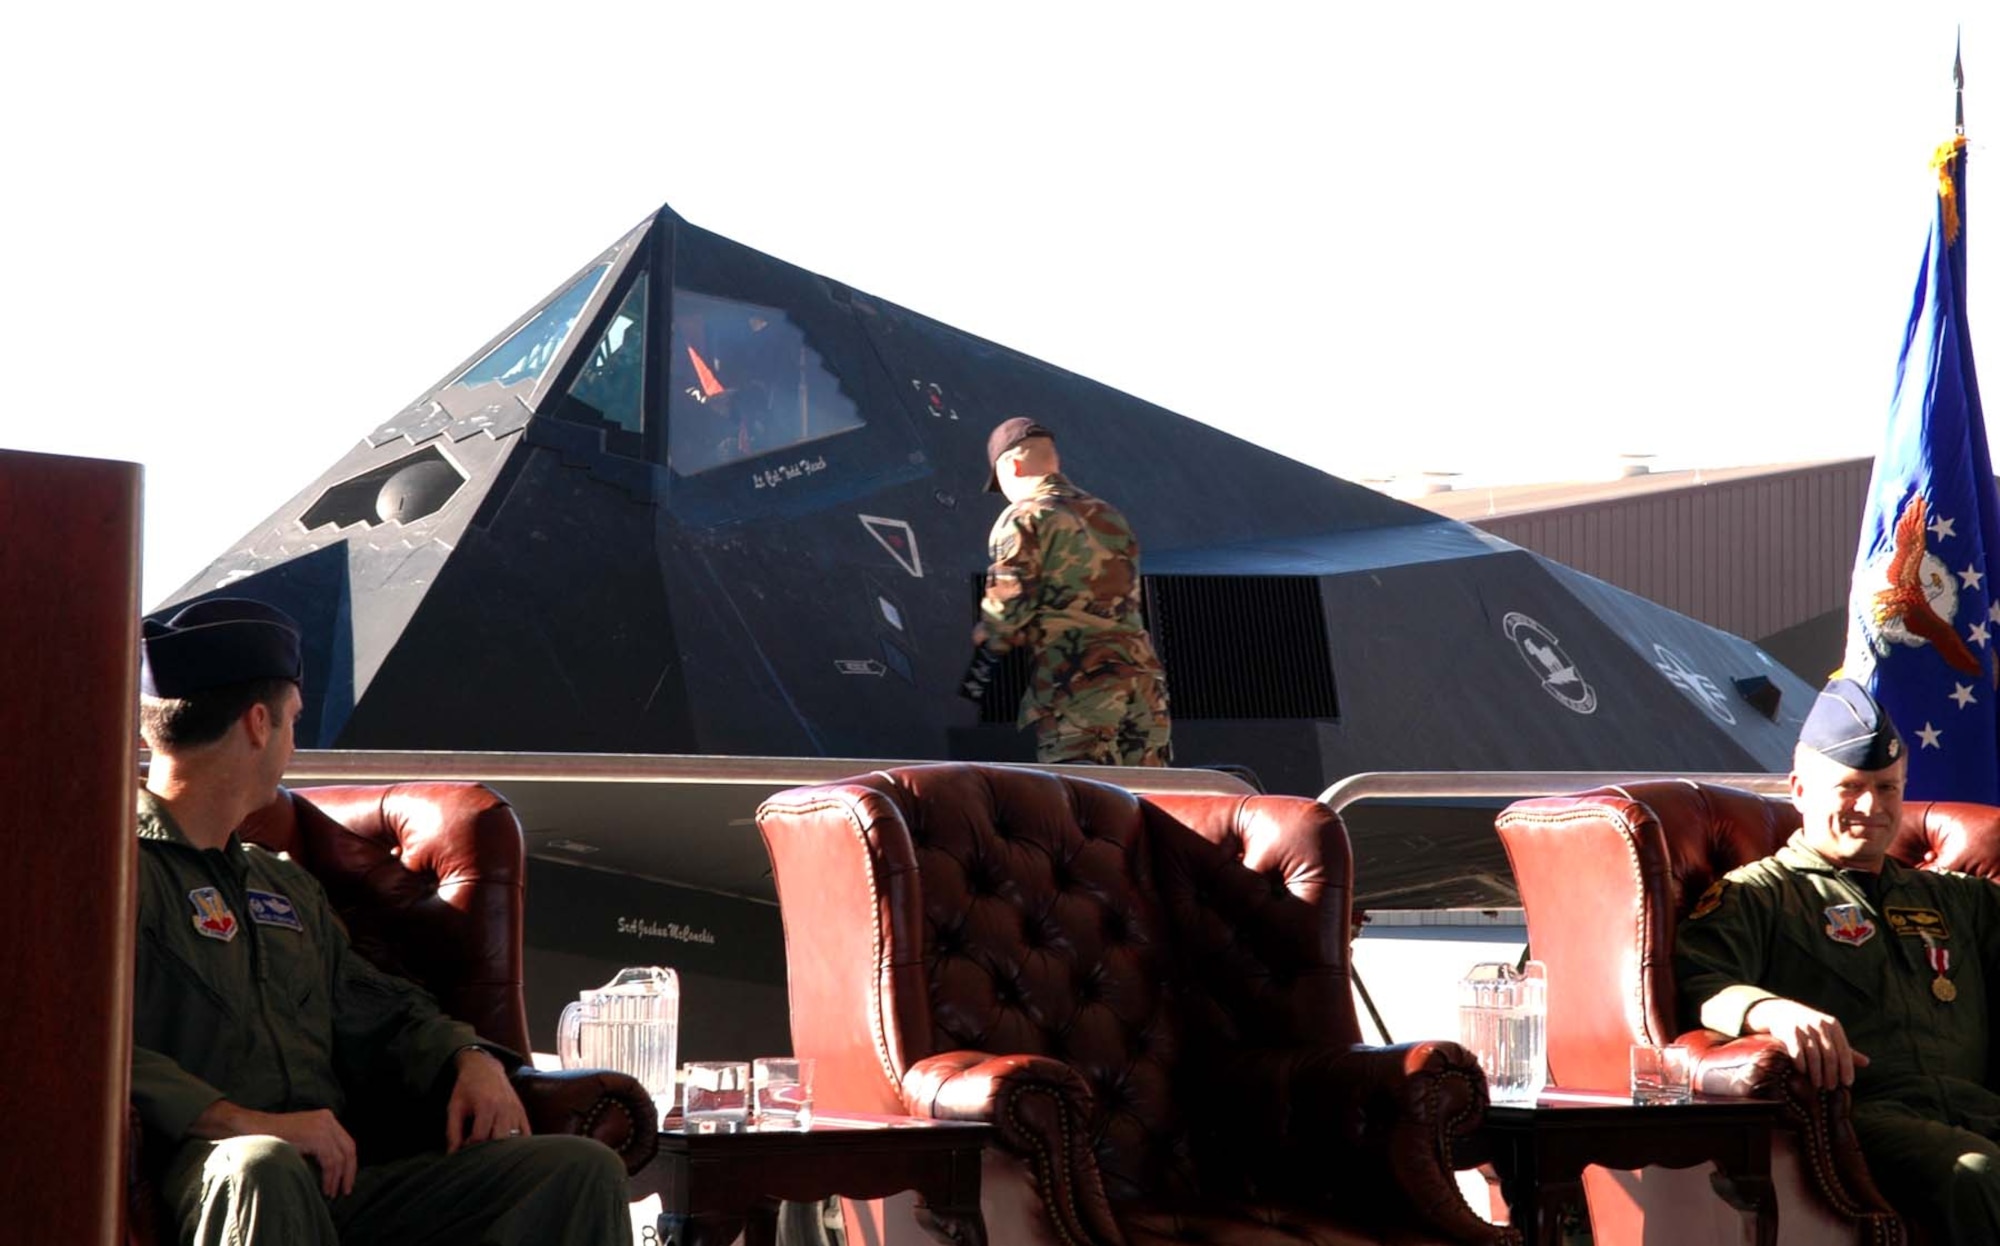 Col. Jack Forsythe, 49th Operations Group commander, looks on as Lt. Col. Todd Flesch's name is revealed on an F-117A as he takes command of the 8th Fighter Squadron. (U.S. photo taken by Airman Jamal Sutter)